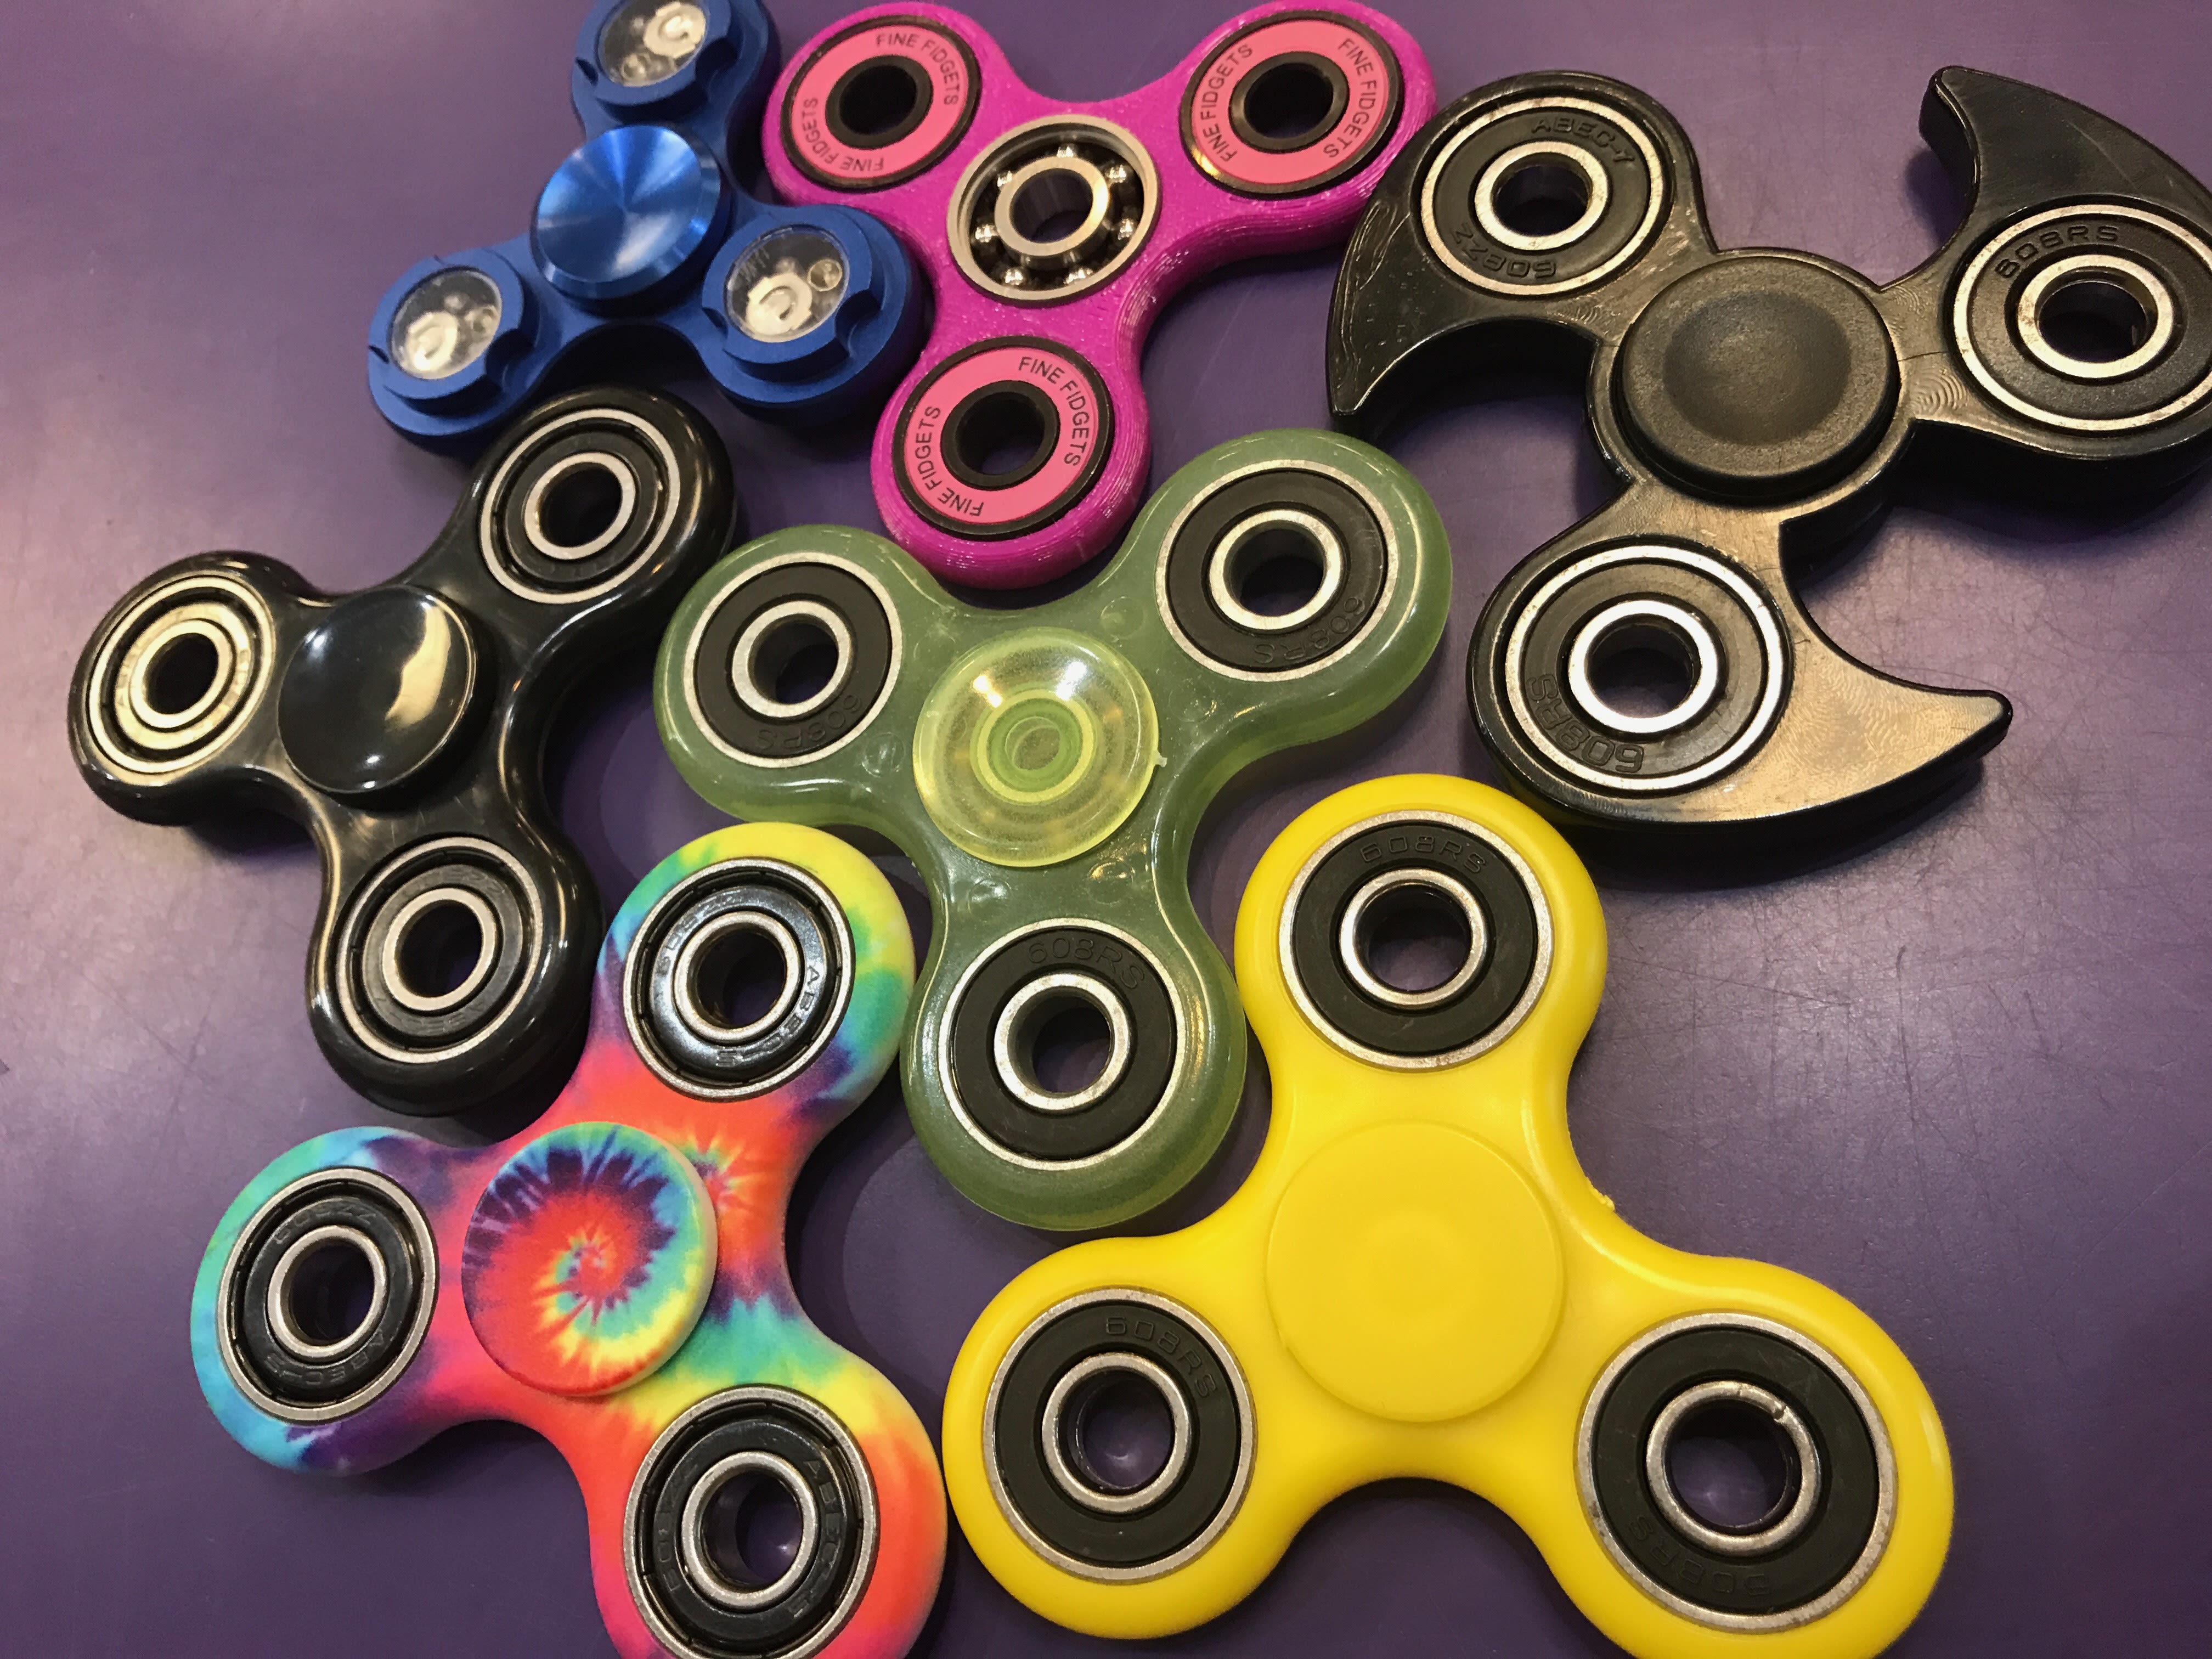 Fidget spinners: Be careful with those, government safety group warns